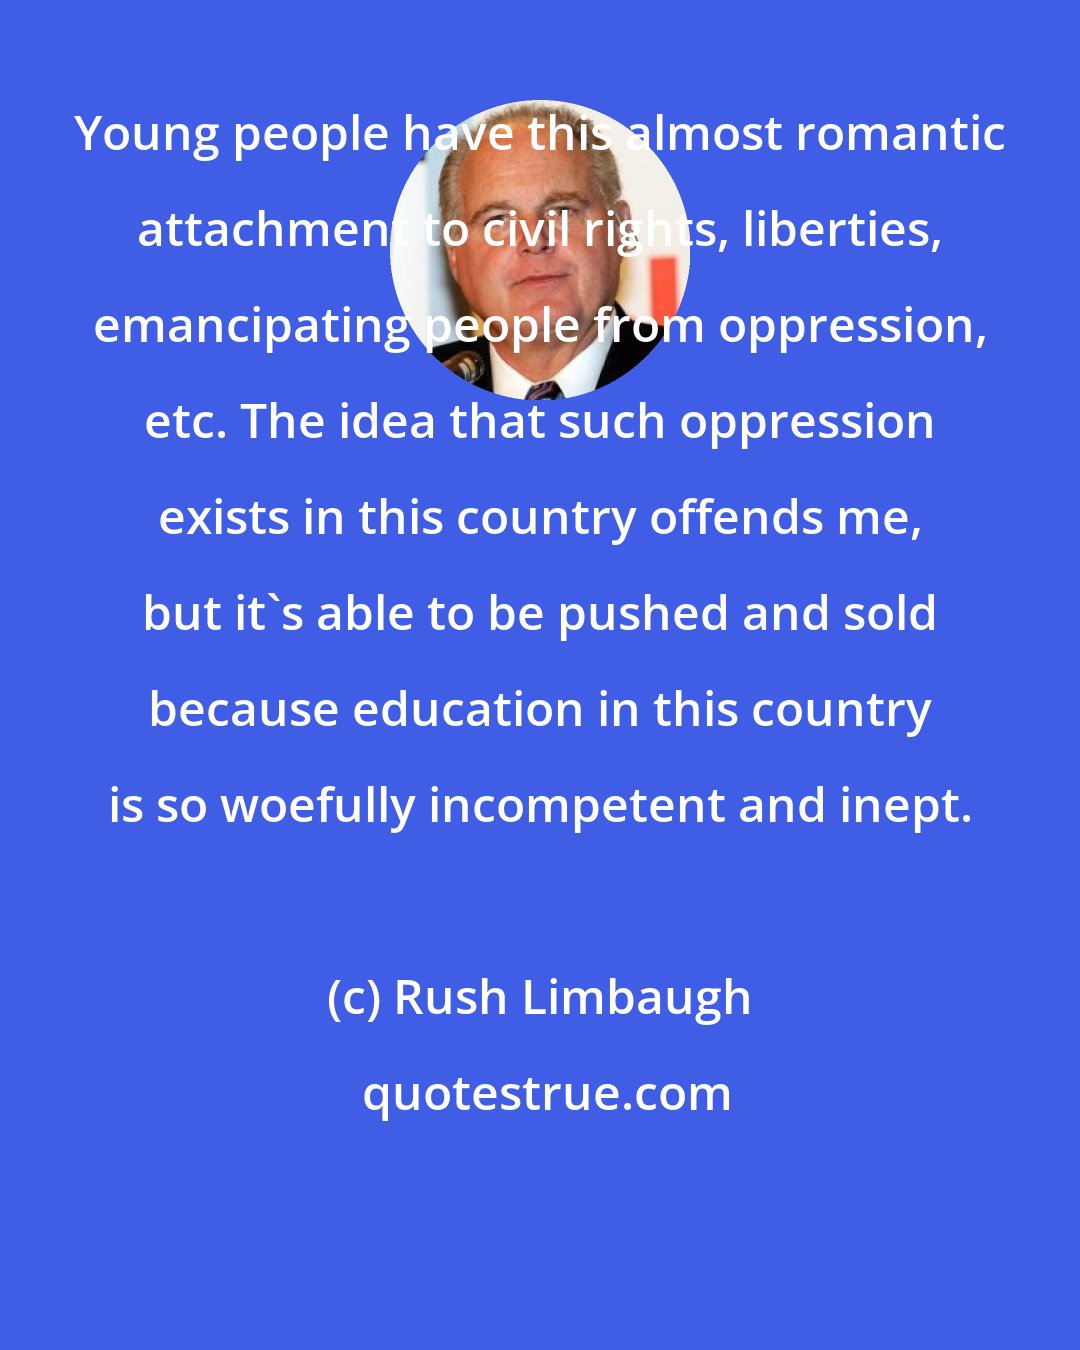 Rush Limbaugh: Young people have this almost romantic attachment to civil rights, liberties, emancipating people from oppression, etc. The idea that such oppression exists in this country offends me, but it's able to be pushed and sold because education in this country is so woefully incompetent and inept.